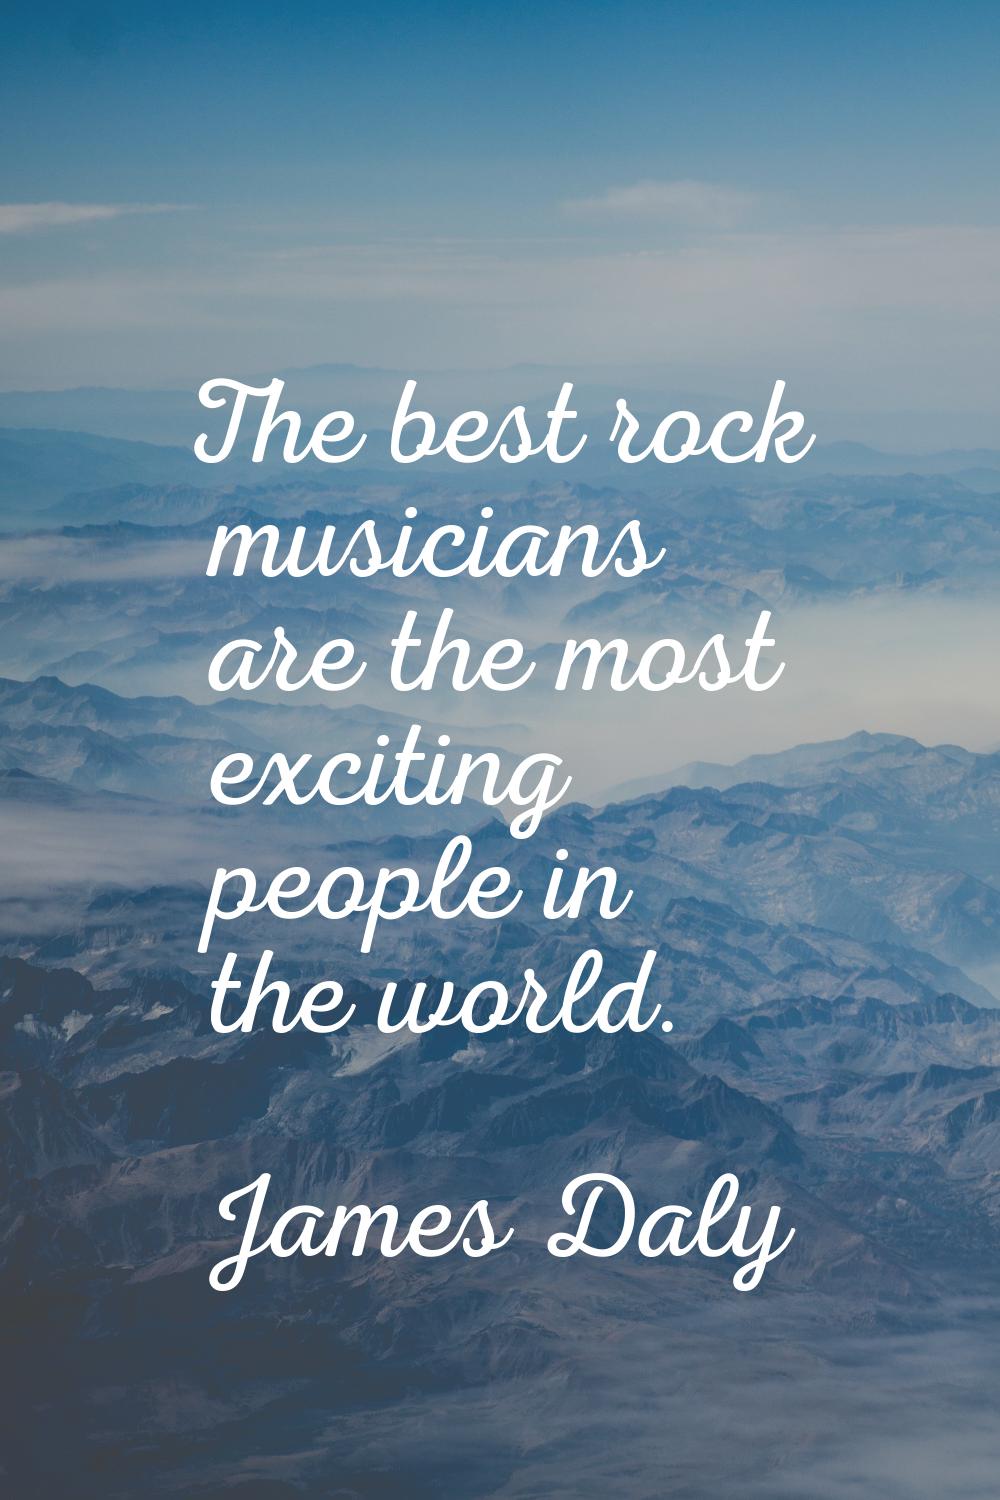 The best rock musicians are the most exciting people in the world.